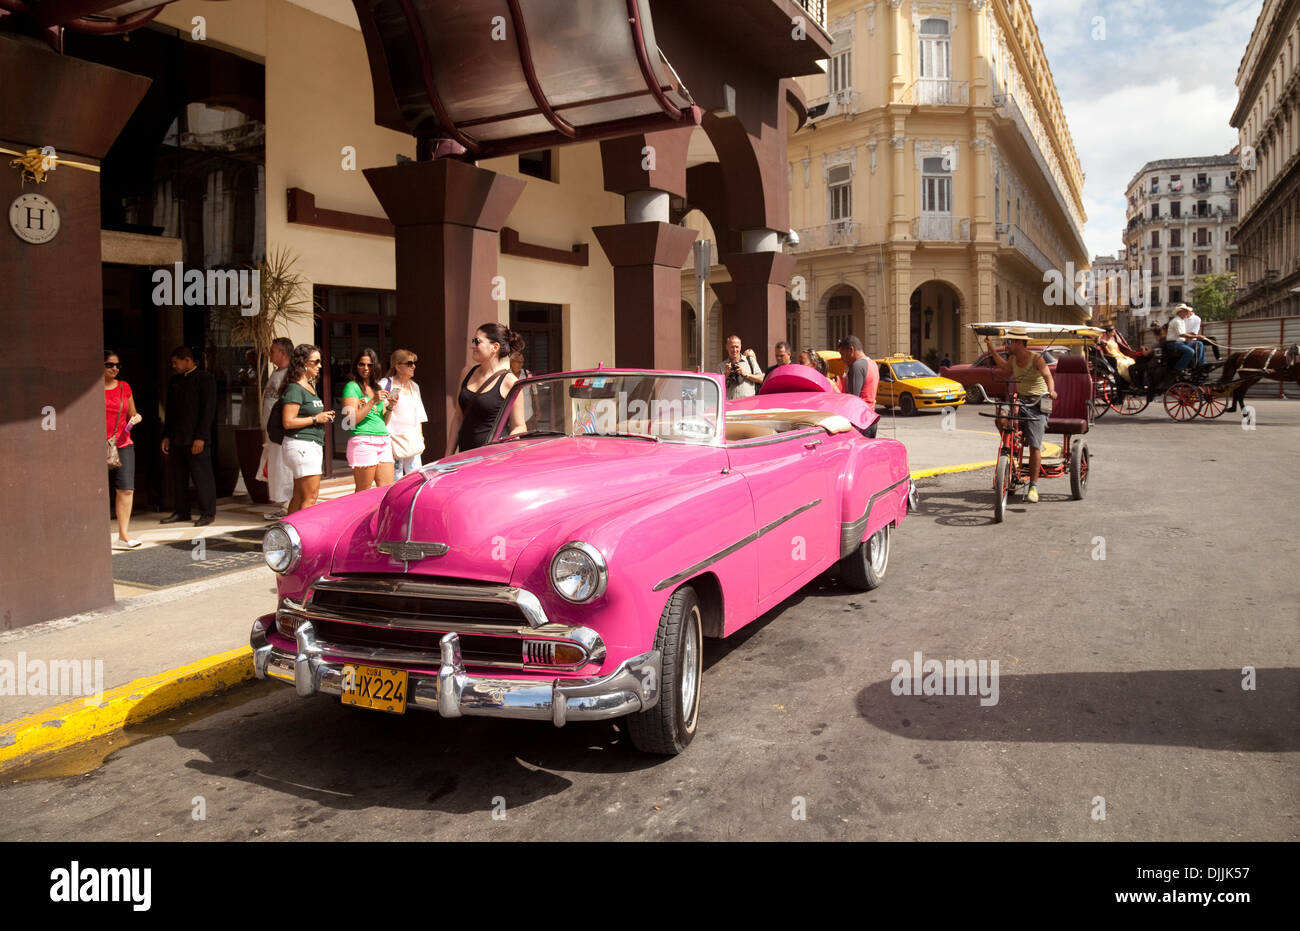 A n old american car taxi waiting on the street outside the Parque Centrale Hotel, Havana, Cuba, Caribbean, Latin America Stock Photo